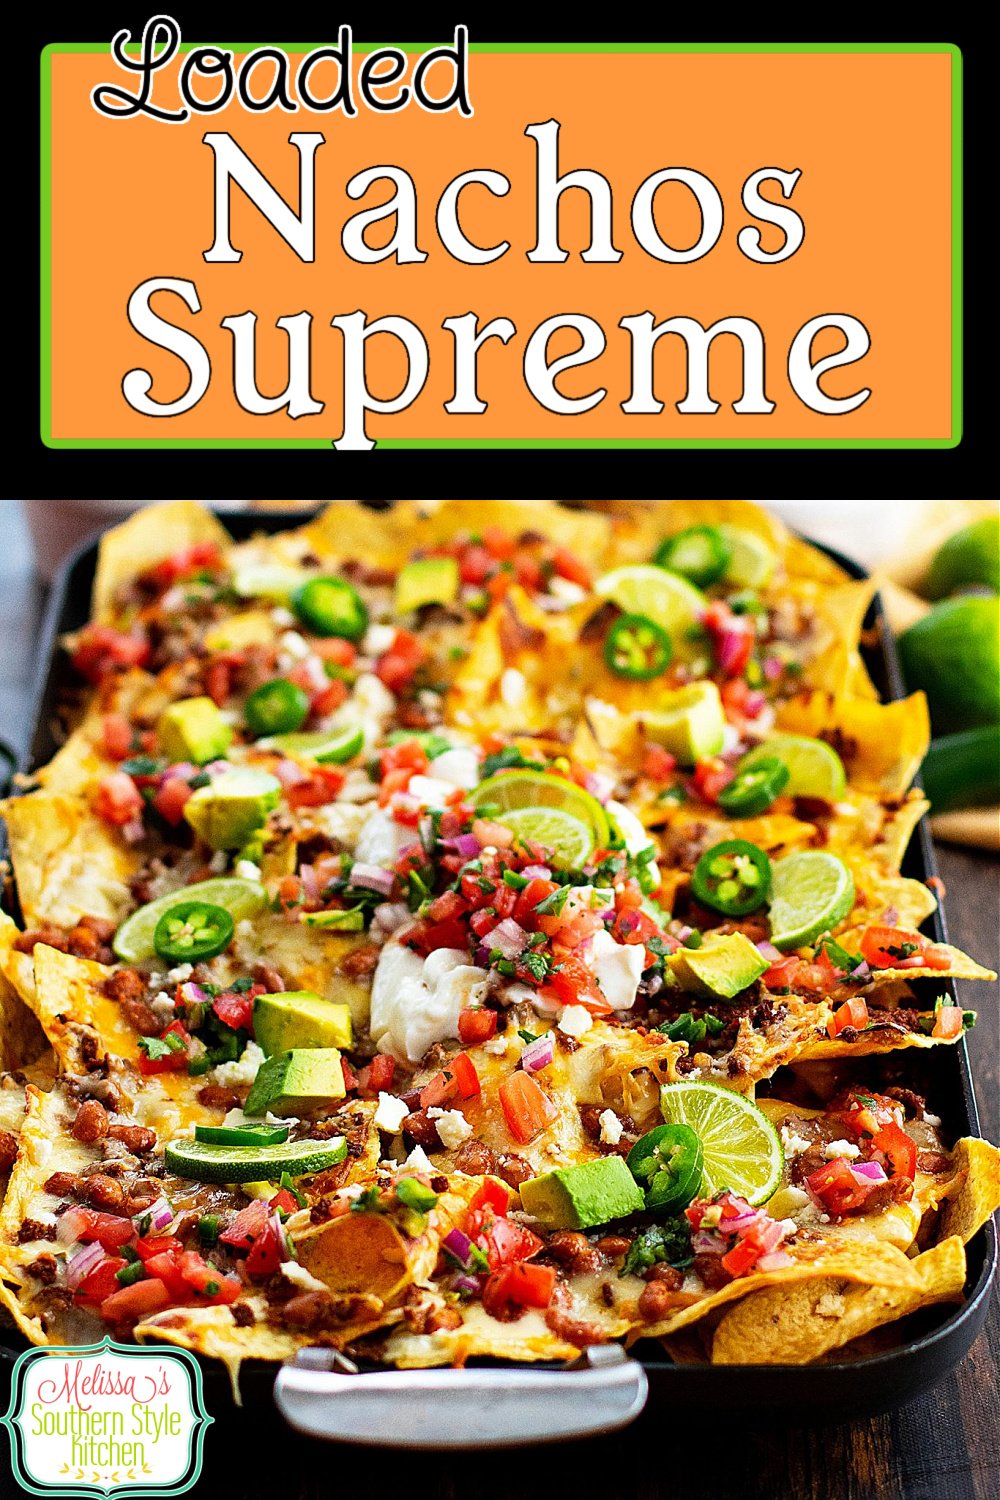 These mouthwatering Loaded Nachos Supreme can be served for snacking or casual dinners #nachos #nachossupreme #loadednachos #easynachos #nachnosrecipes #southernrecipes #snacking #appetizers #mexicanfood #queso #gamedaysnacks via @melissasssk